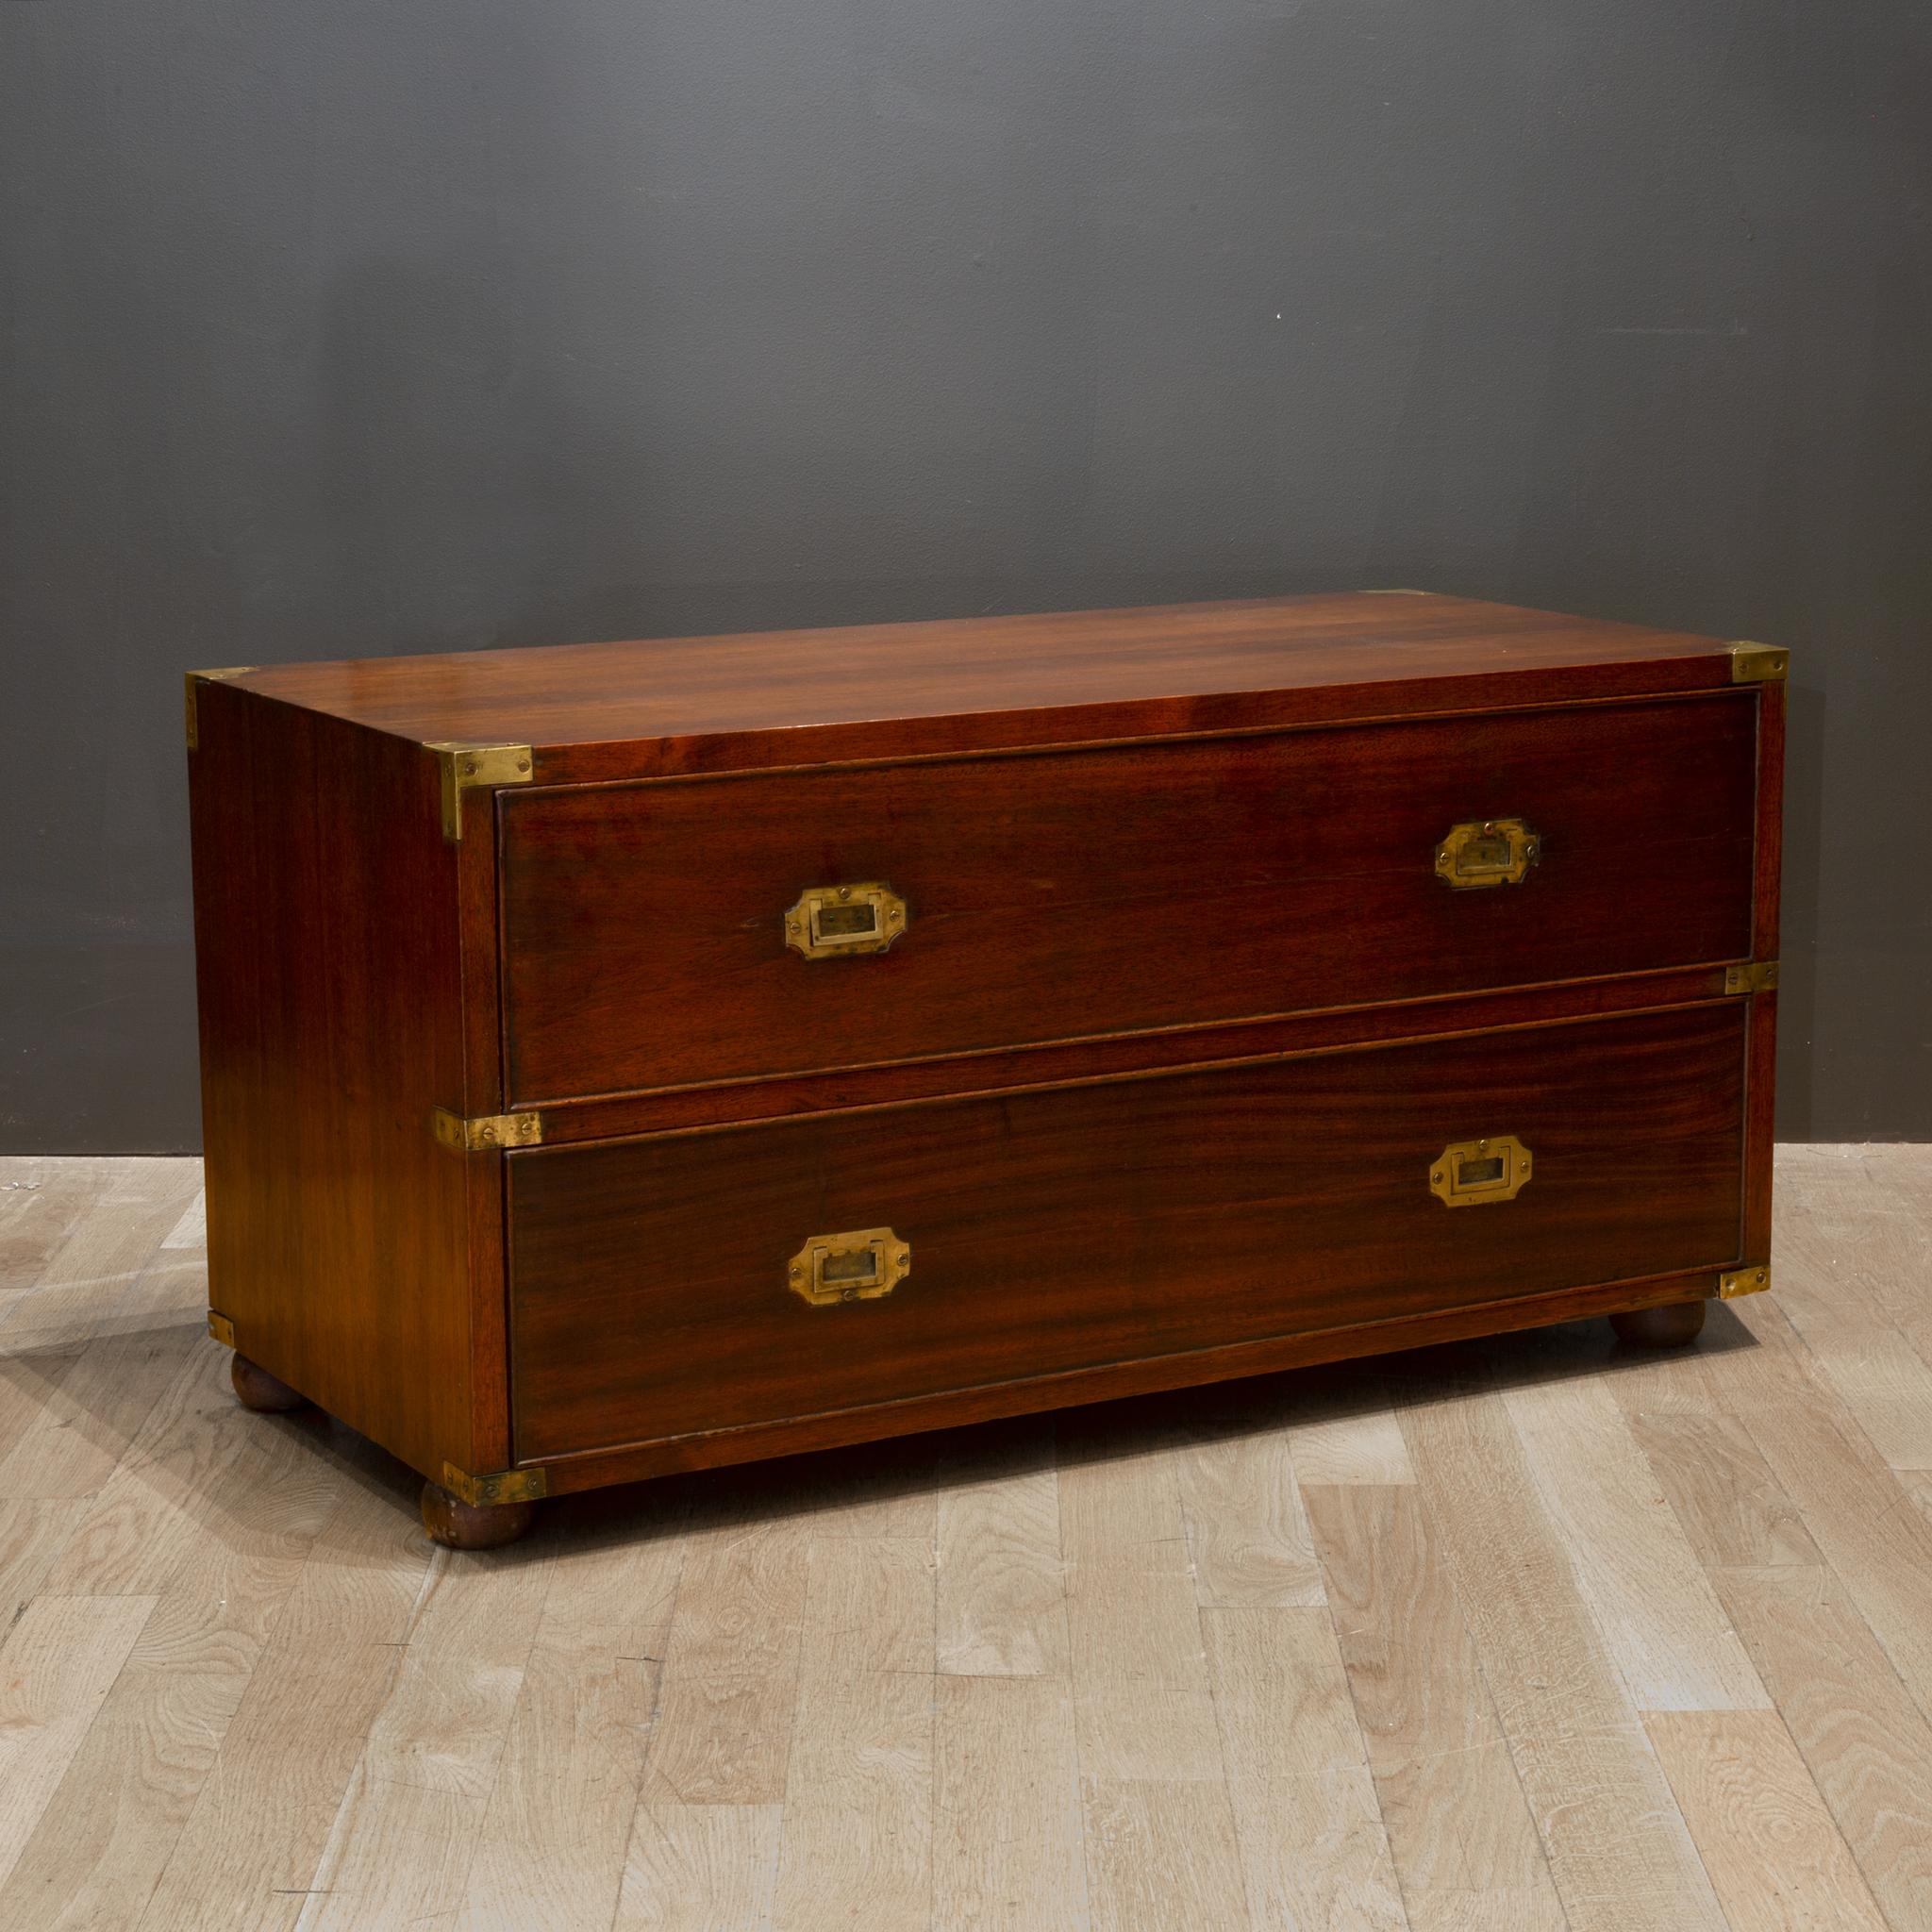 About

A two-drawer Mahogany campaign chest with brass pulls, brass corners, dovetail joints and raised trim edges on each drawer.

Contact us for more shipping options: S16 Home San Francisco

Creator: Unknown. Possibly English.
Date of